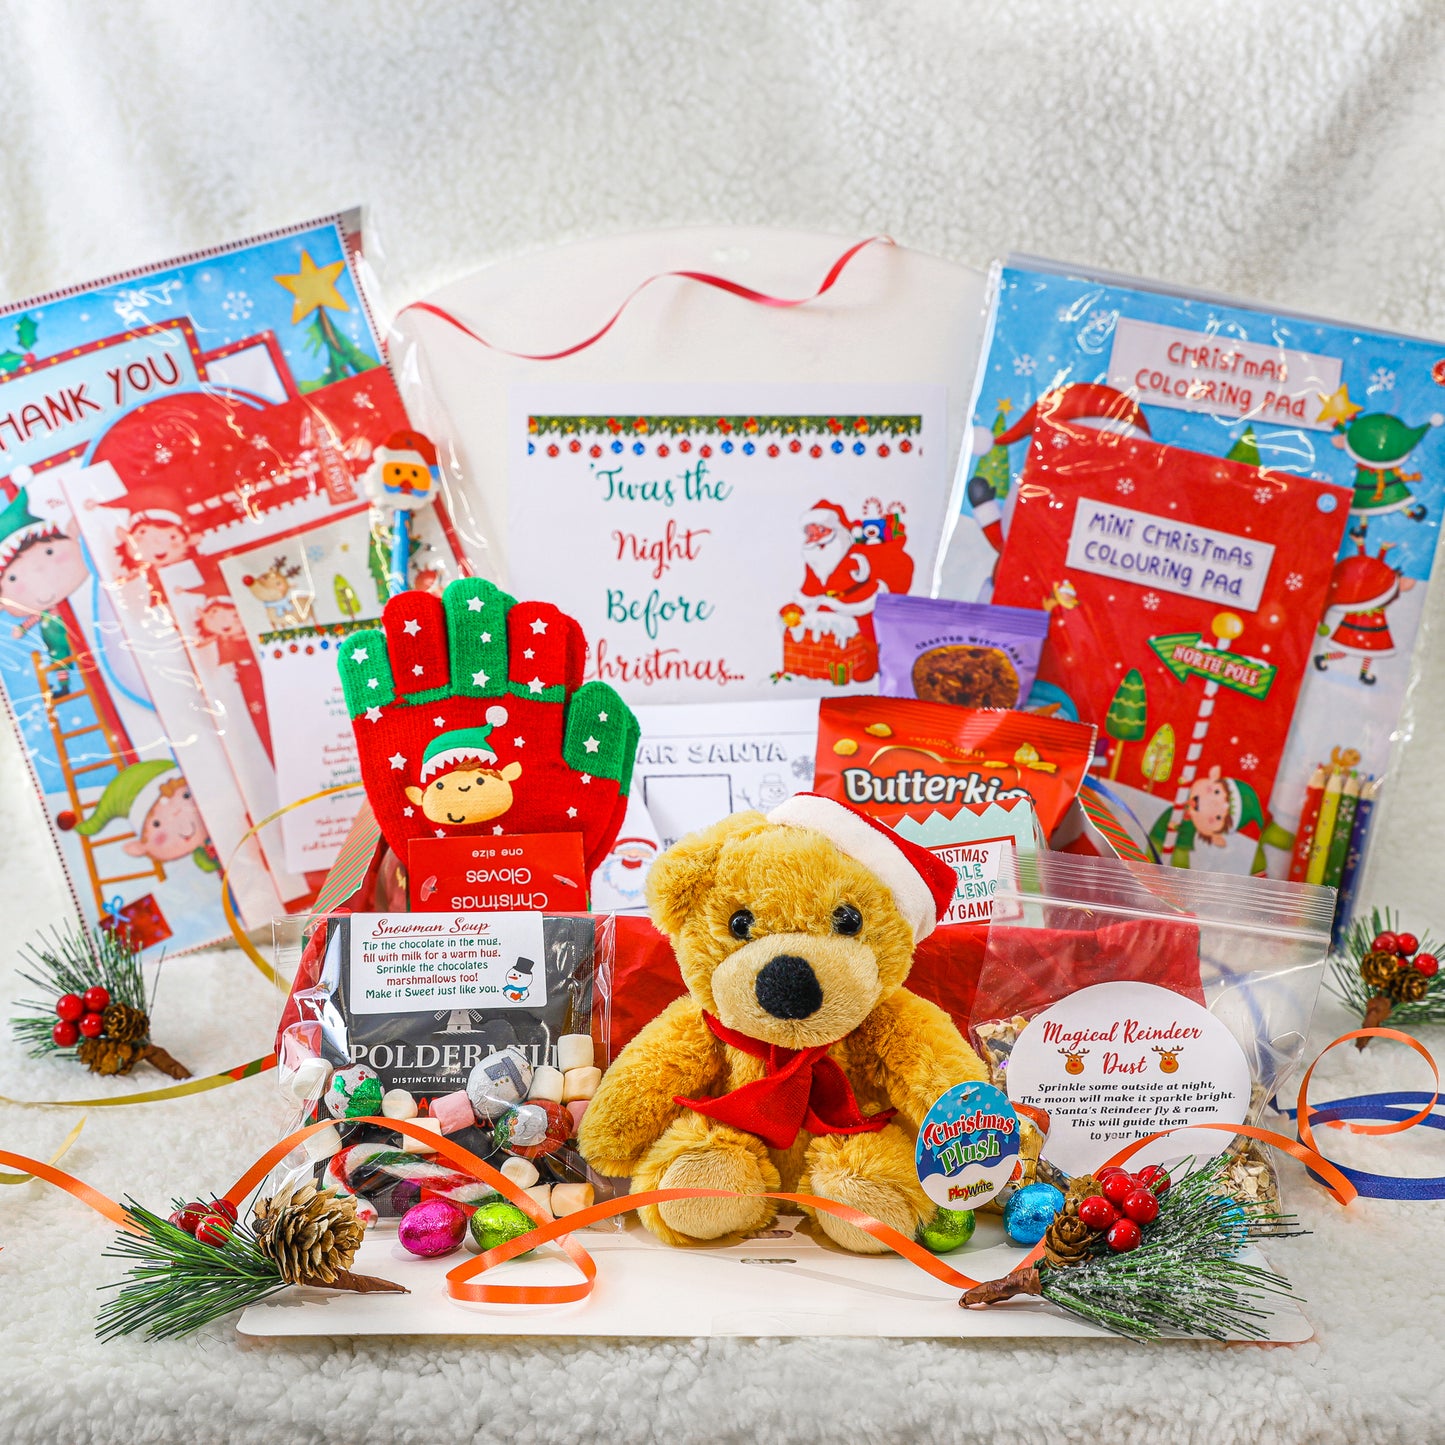 Personalised Christmas Eve Box Filled with Activities and Fun for Kids  - Always Looking Good - Christmas Eve Box With Christmas Teddy  